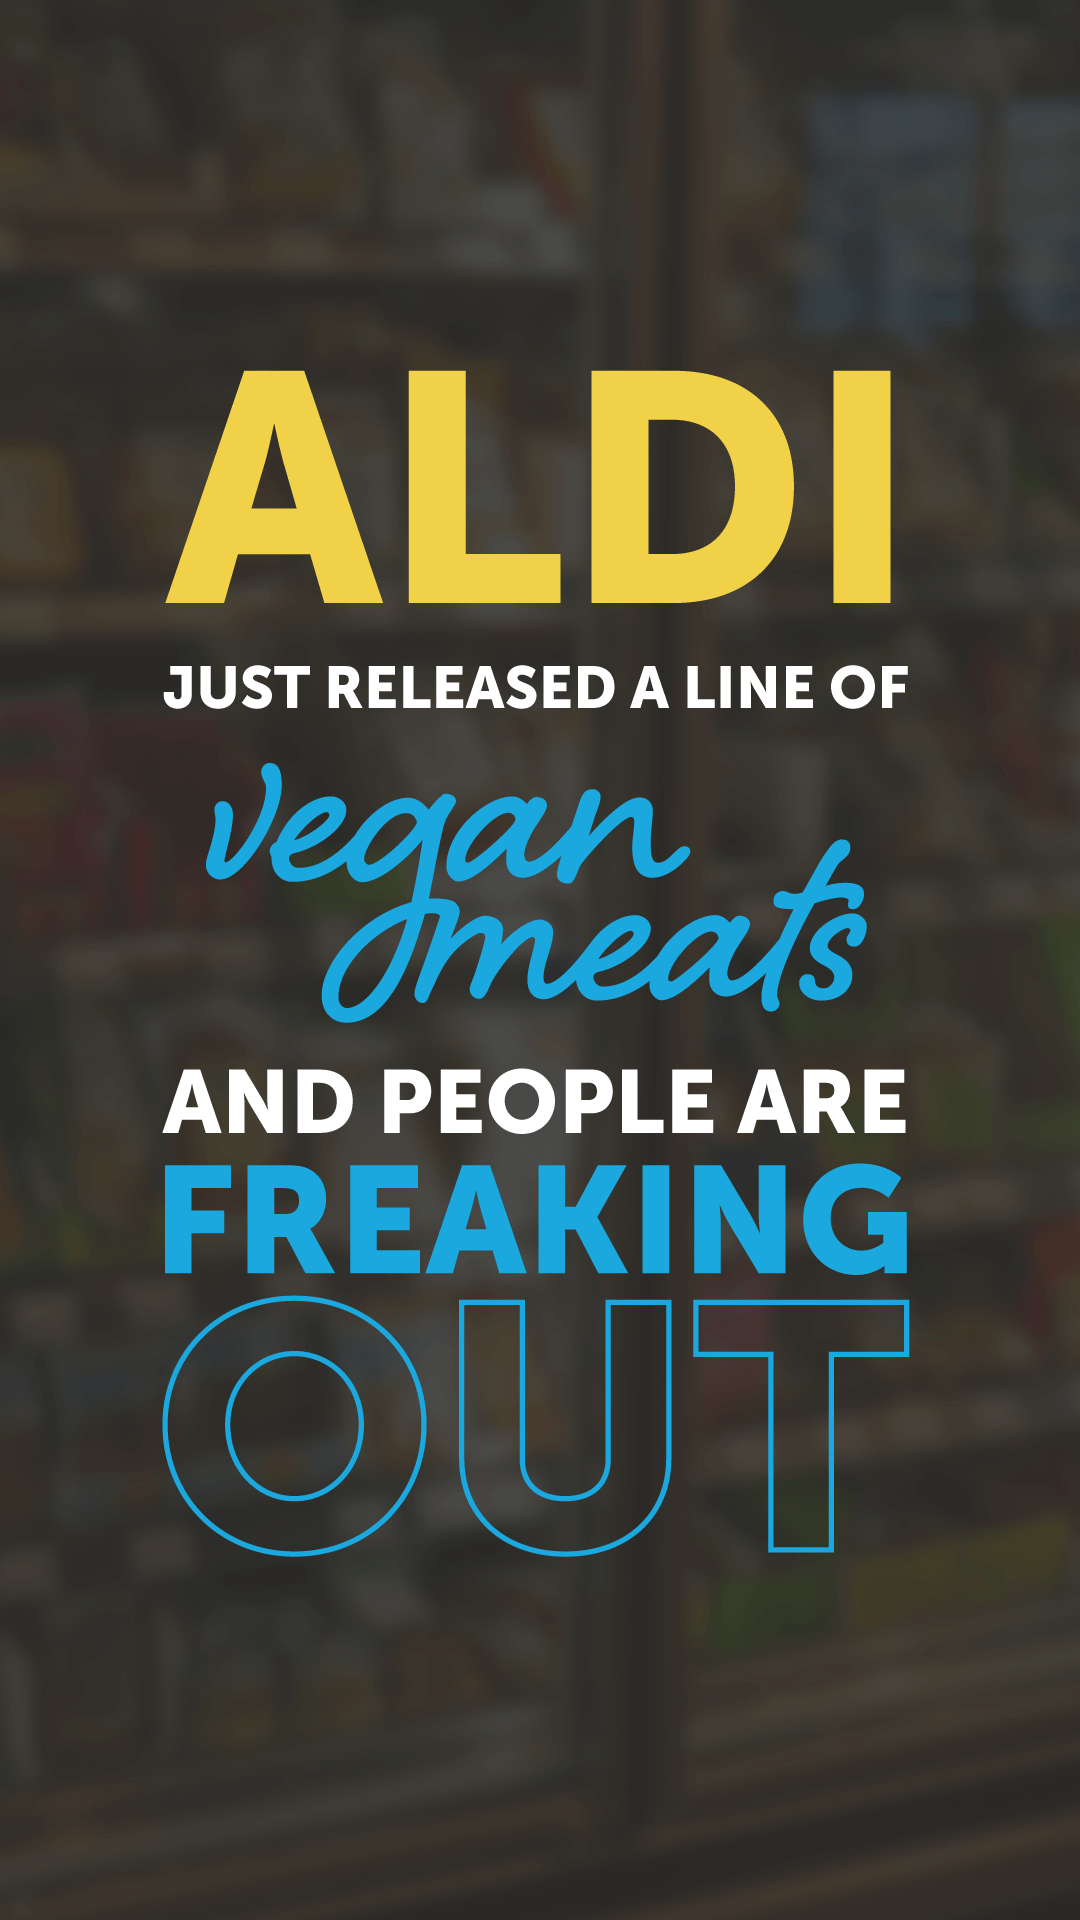 Aldi Just Released a Line of Vegan Meats and People Are Freaking Out